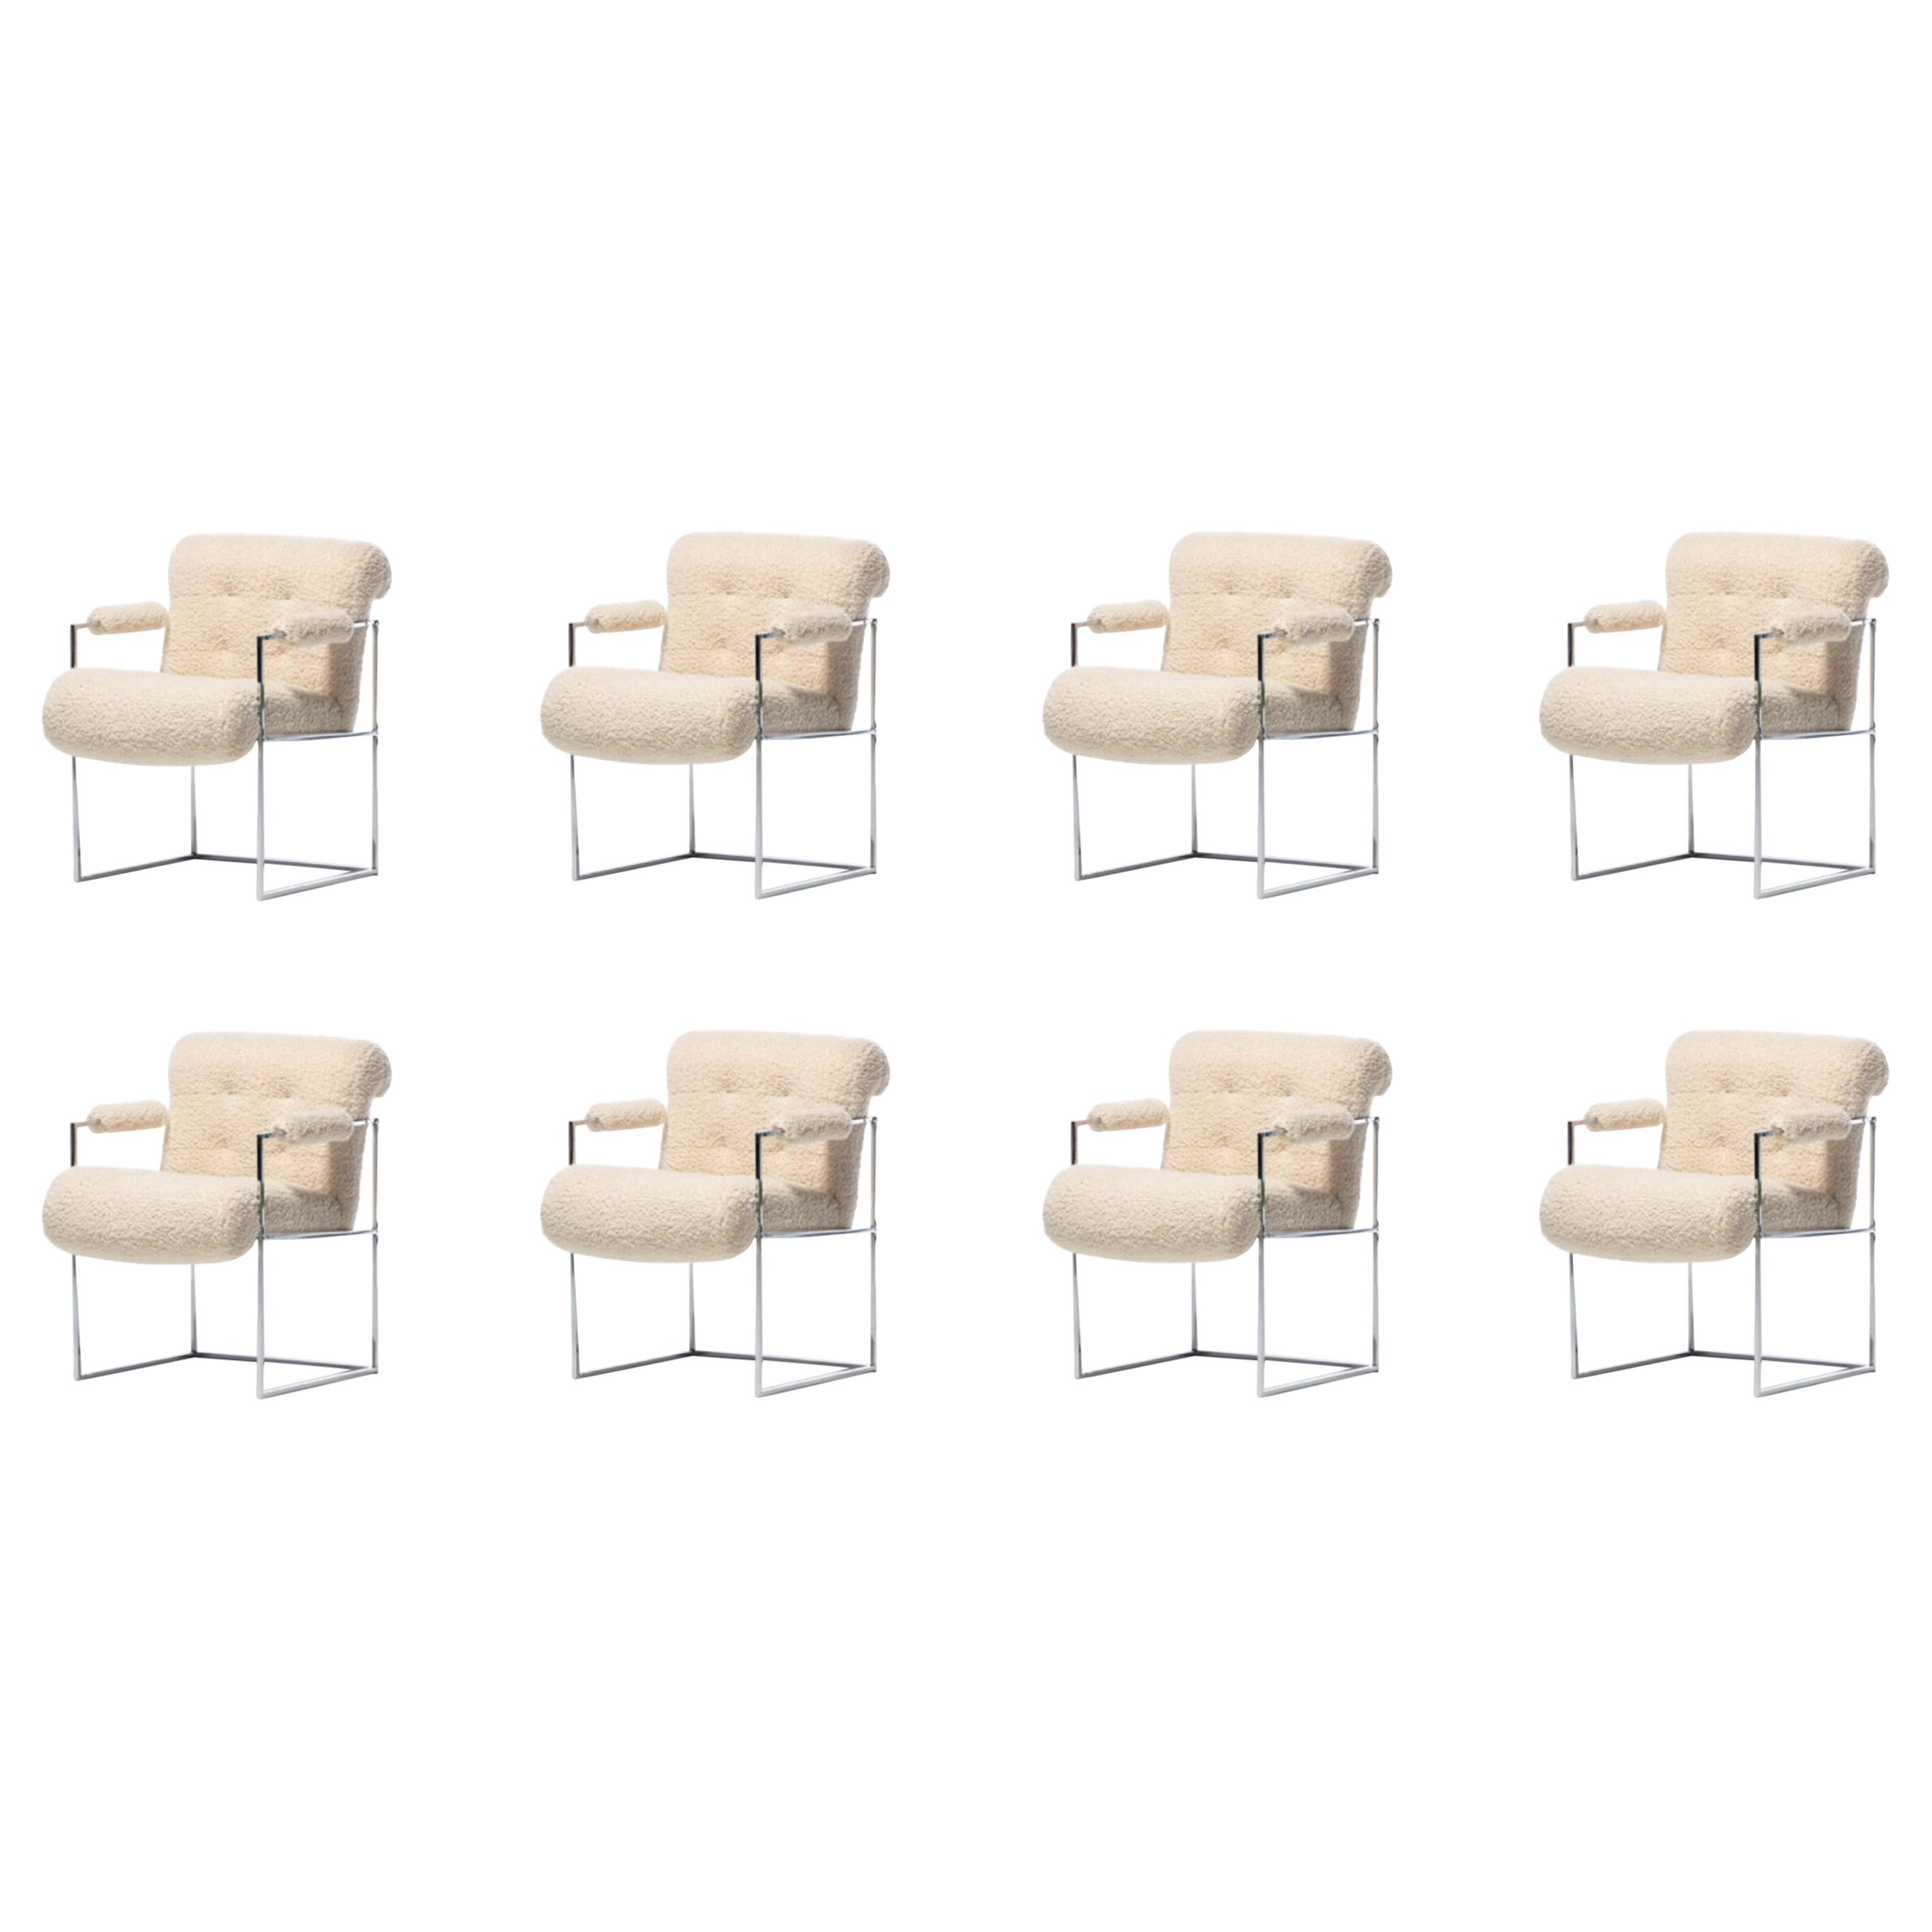 Milo Baughman Set of 8 Chrome Dining Chairs in Ivory Boucle, circa 1975 For Sale